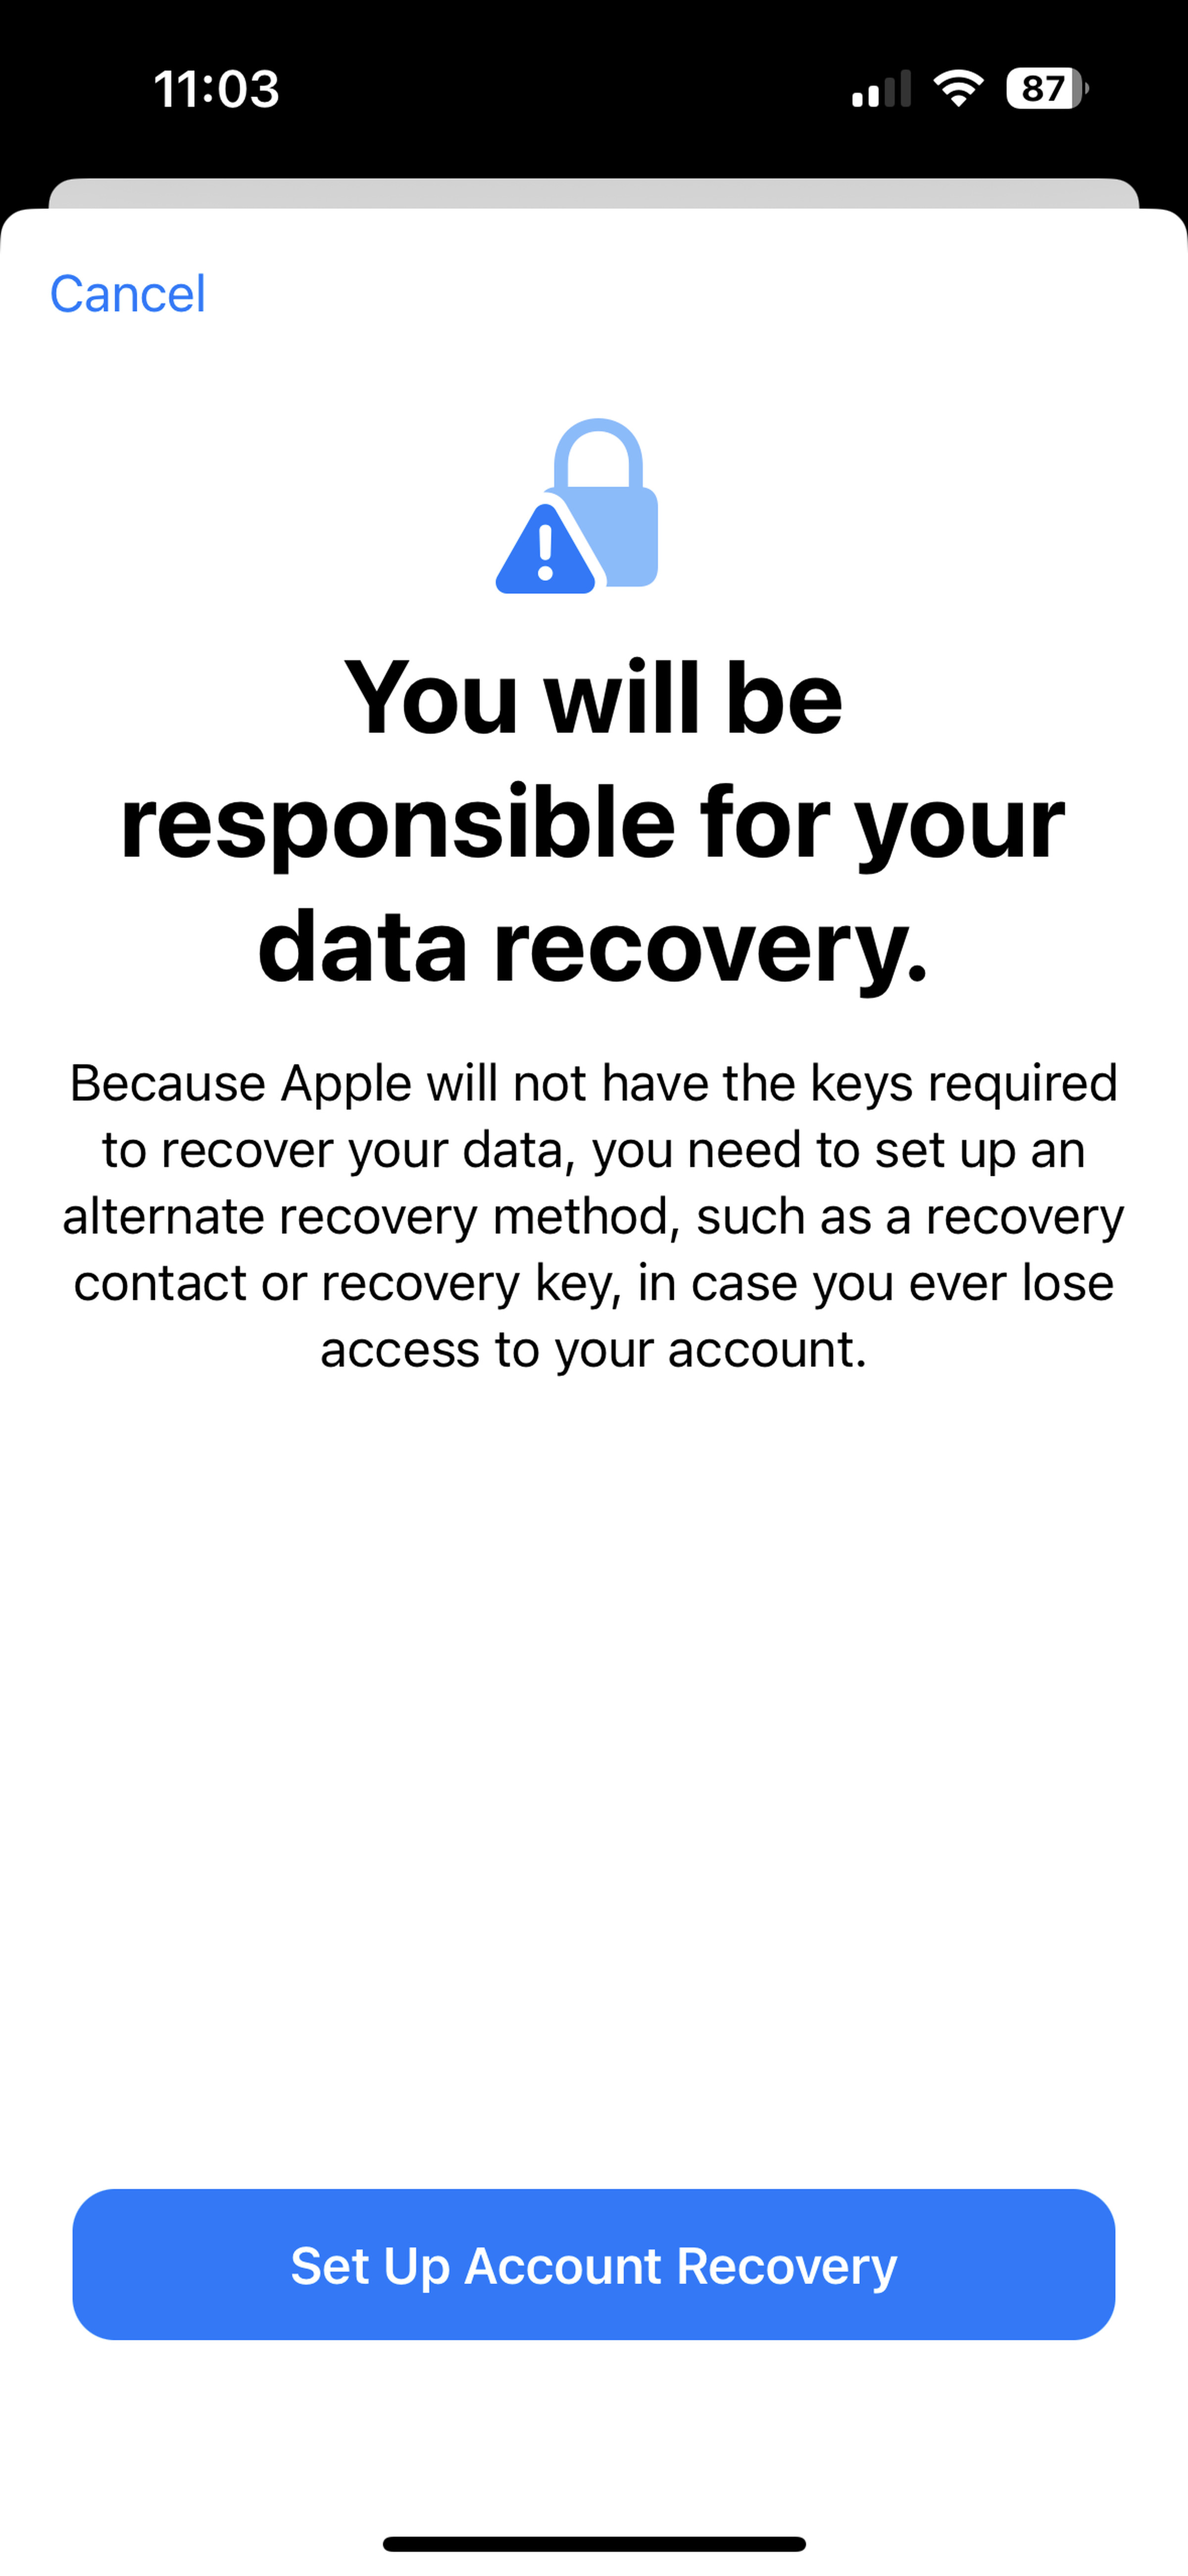 Screenshot with text indicating that the user needs to set up account recovery because Apple will no longer have access.